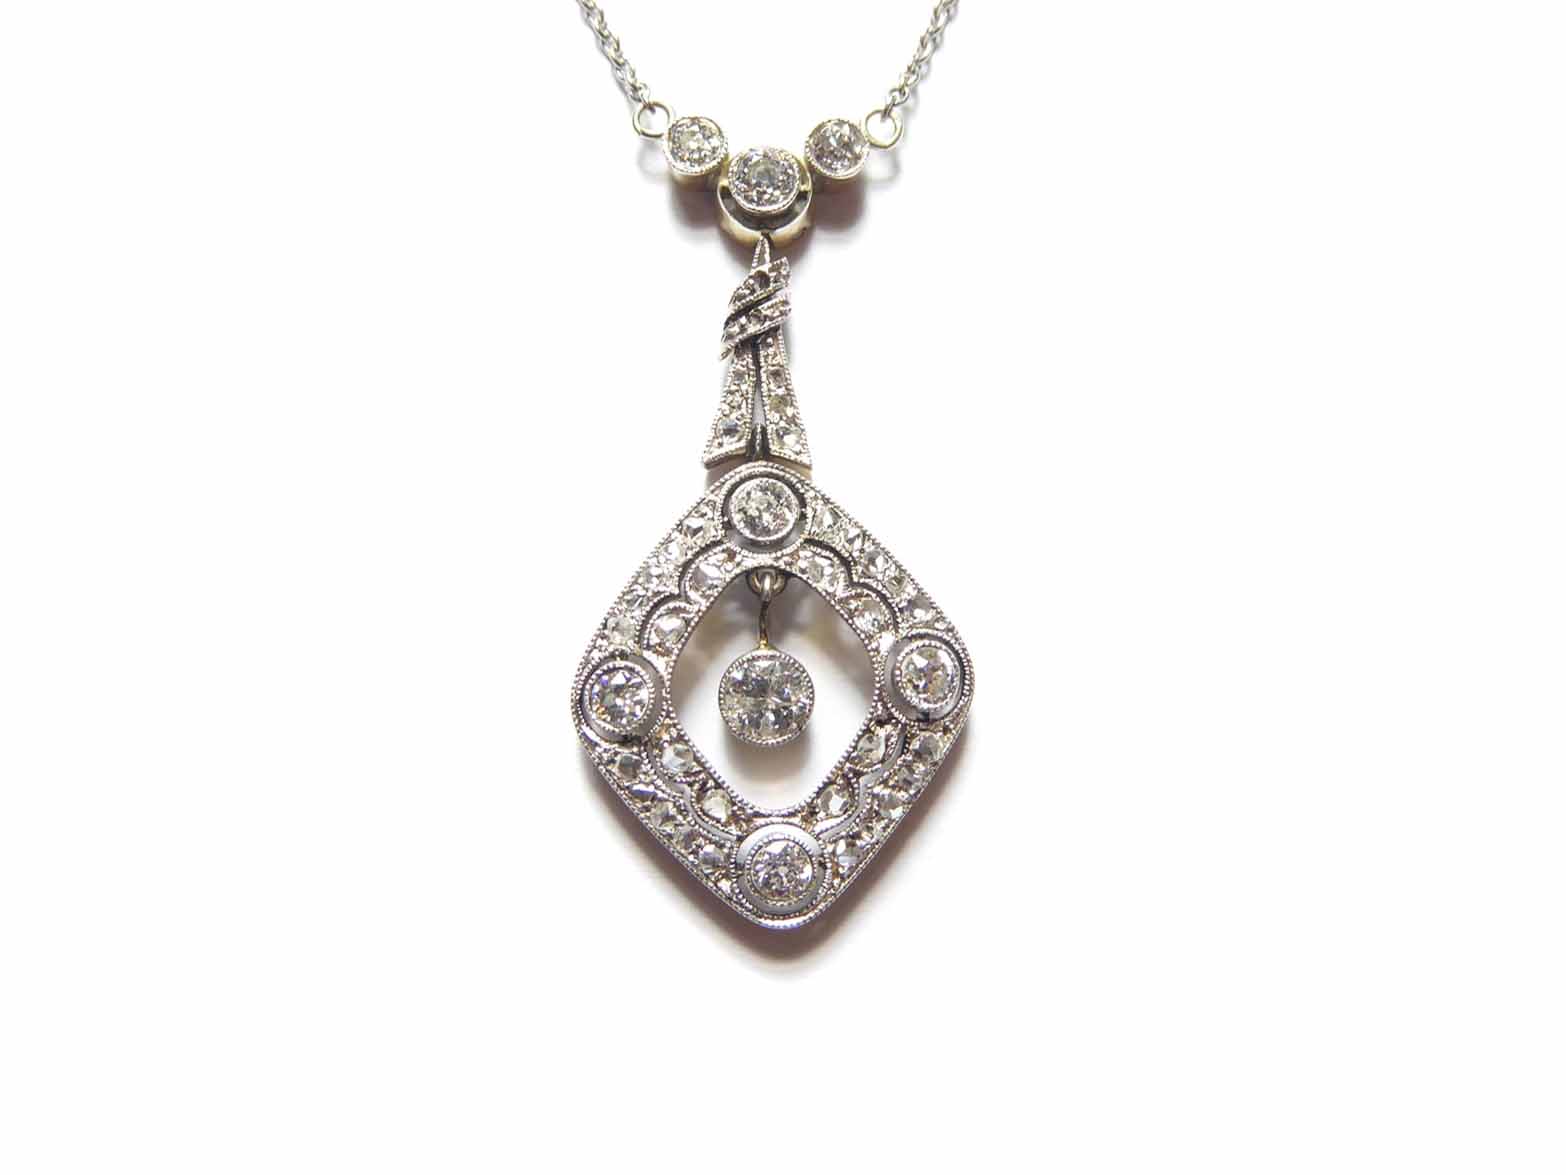 Antique French Diamond Necklace, c.1900-1920 — Jewellery Discovery